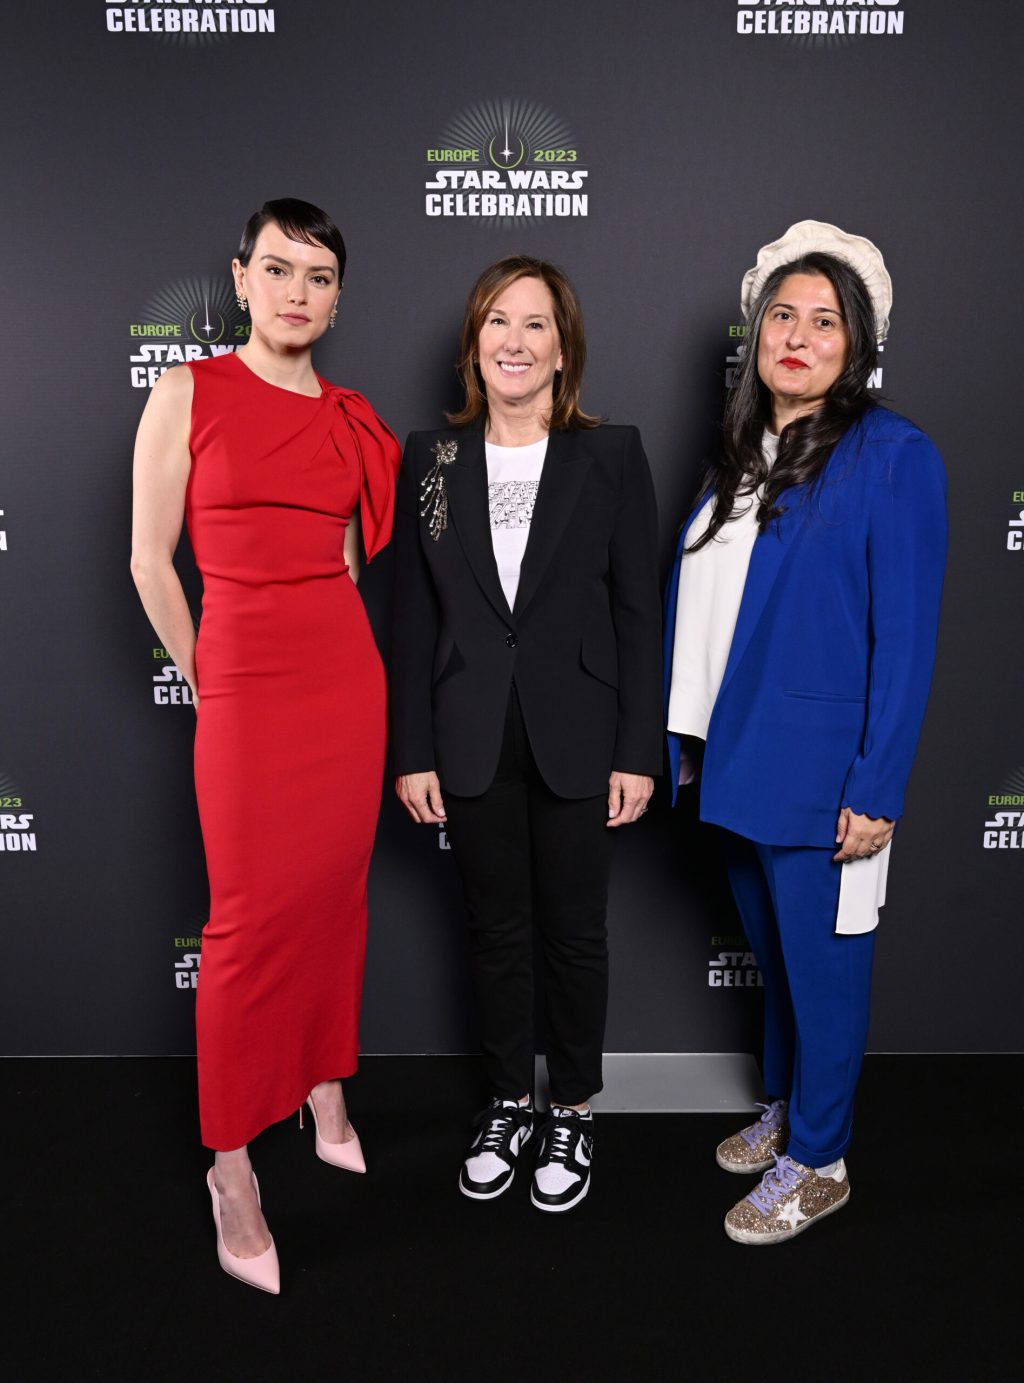 LONDON, ENGLAND - APRIL 07: (L-R) Daisy Ridley, Kathleen Kennedy and Sharmeen Obaid-Chinoy attend the studio panel at Star Wars Celebration 2023 attends the studio panel at Star Wars Celebration 2023 in London at ExCel on April 07, 2023 in London, England. (Photo by Jeff Spicer/Jeff Spicer/Getty Images for Disney)